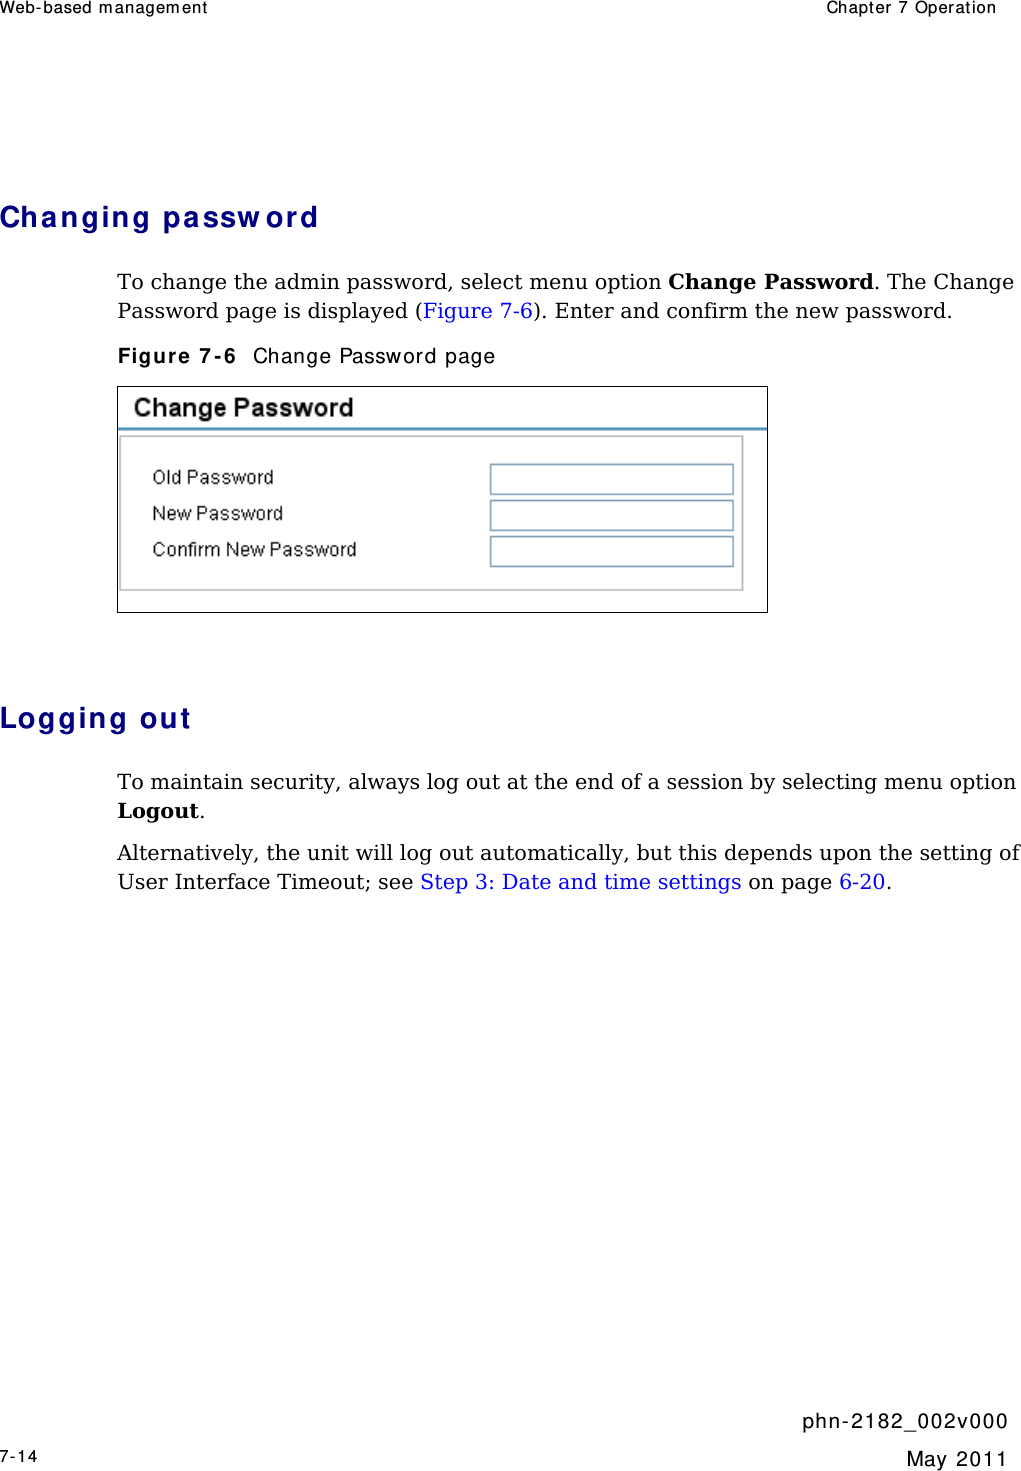 Web- based m anagem ent   Chapt er  7 Operat ion     phn- 2 182_002v 000 7-14  May 2011   Cha nging pa ssw ord  To change the admin password, select menu option Change Password. The Change Password page is displayed (Figure 7-6). Enter and confirm the new password. Figure 7 - 6   Change Password page   Logging out  To maintain security, always log out at the end of a session by selecting menu option Logout.  Alternatively, the unit will log out automatically, but this depends upon the setting of User Interface Timeout; see Step 3: Date and time settings on page 6-20.    